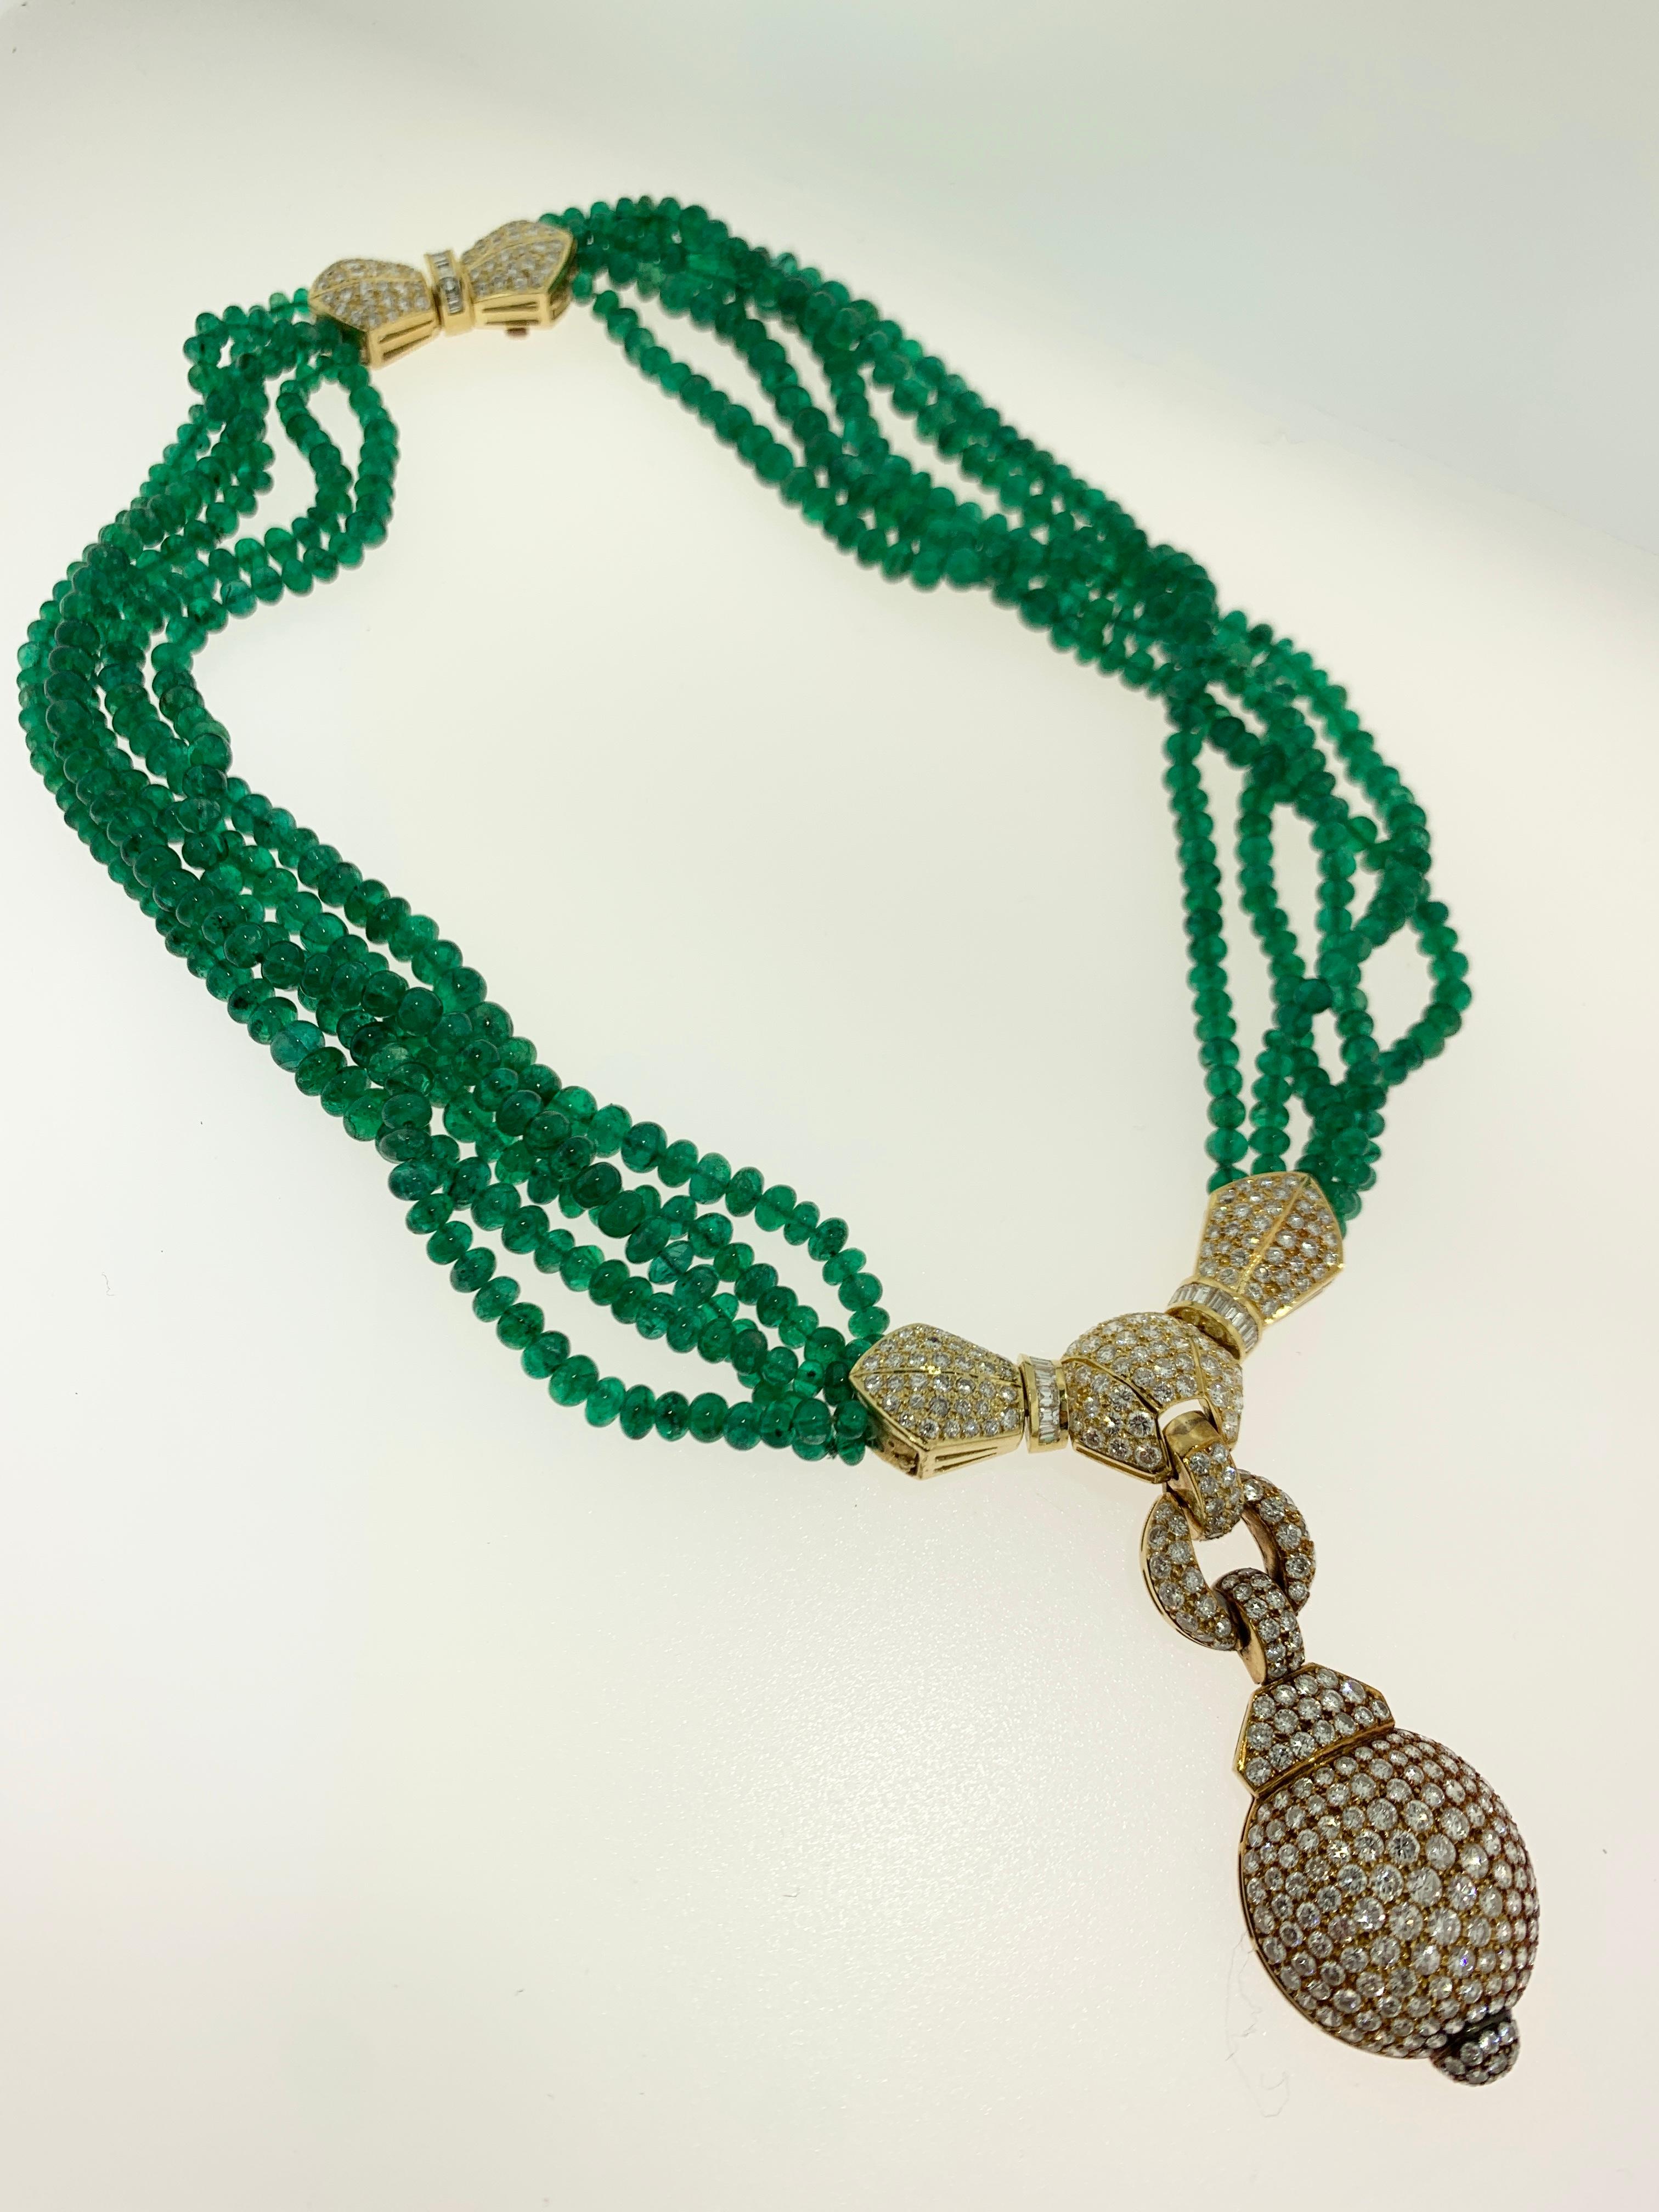 emerald beads necklace with pendant